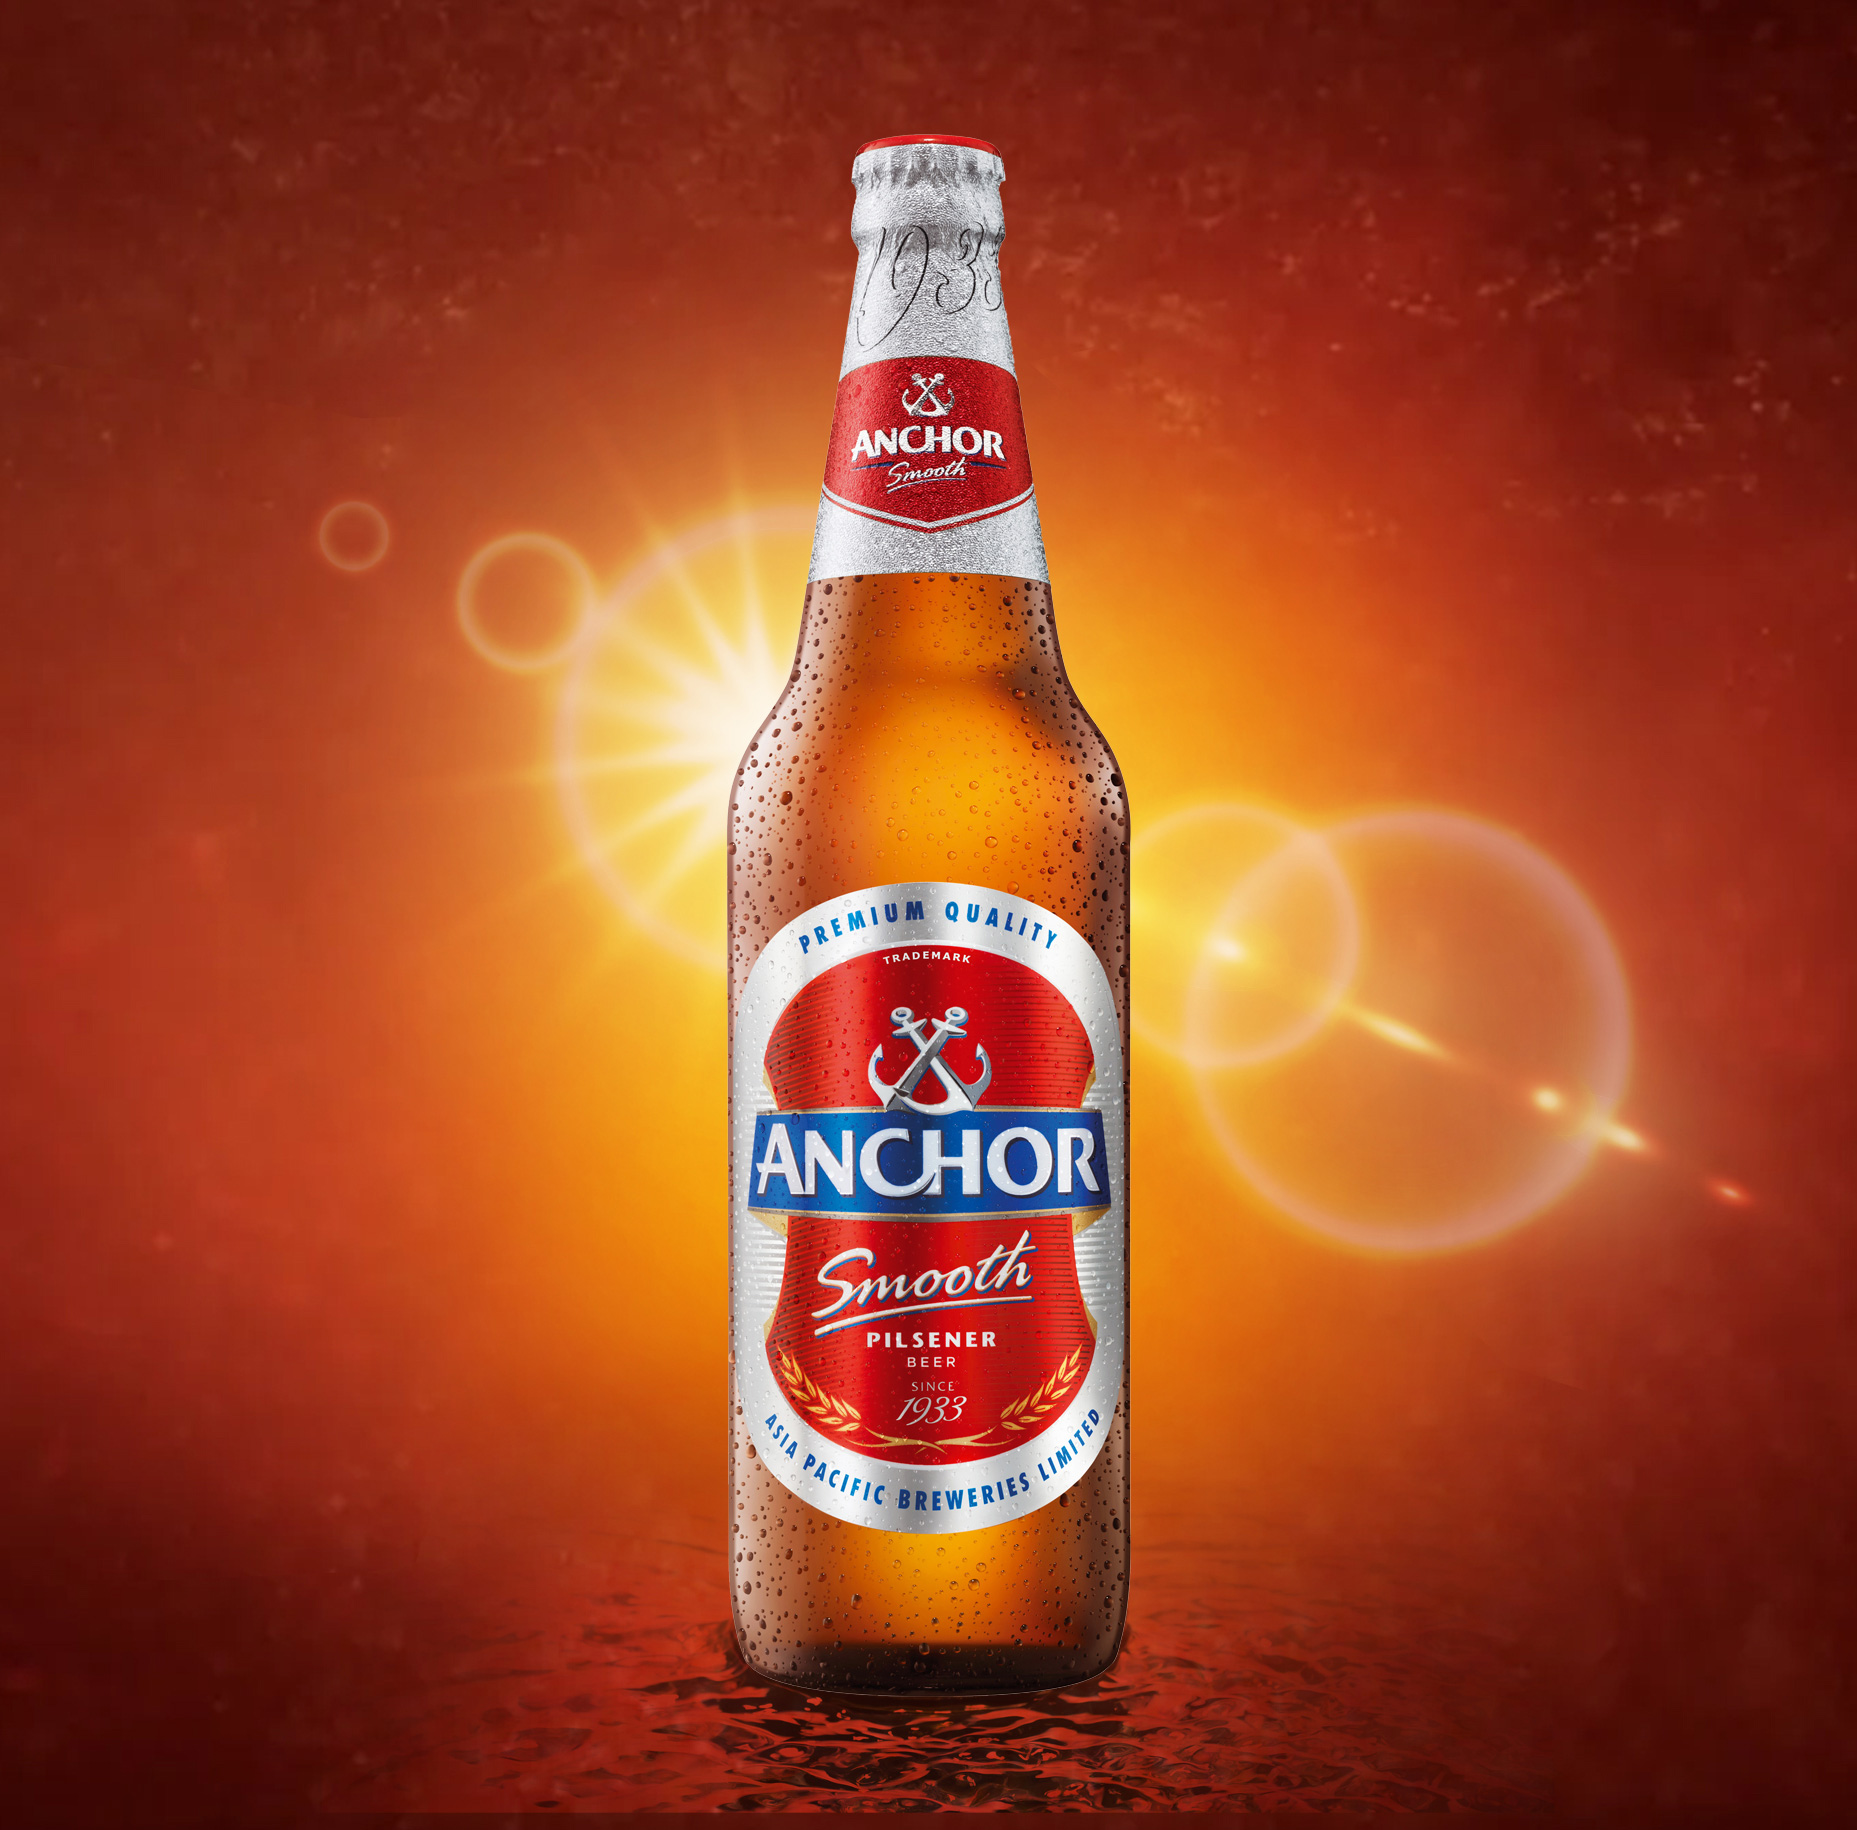 Anchor Smooth - Asia Pacific Breweries Singapore